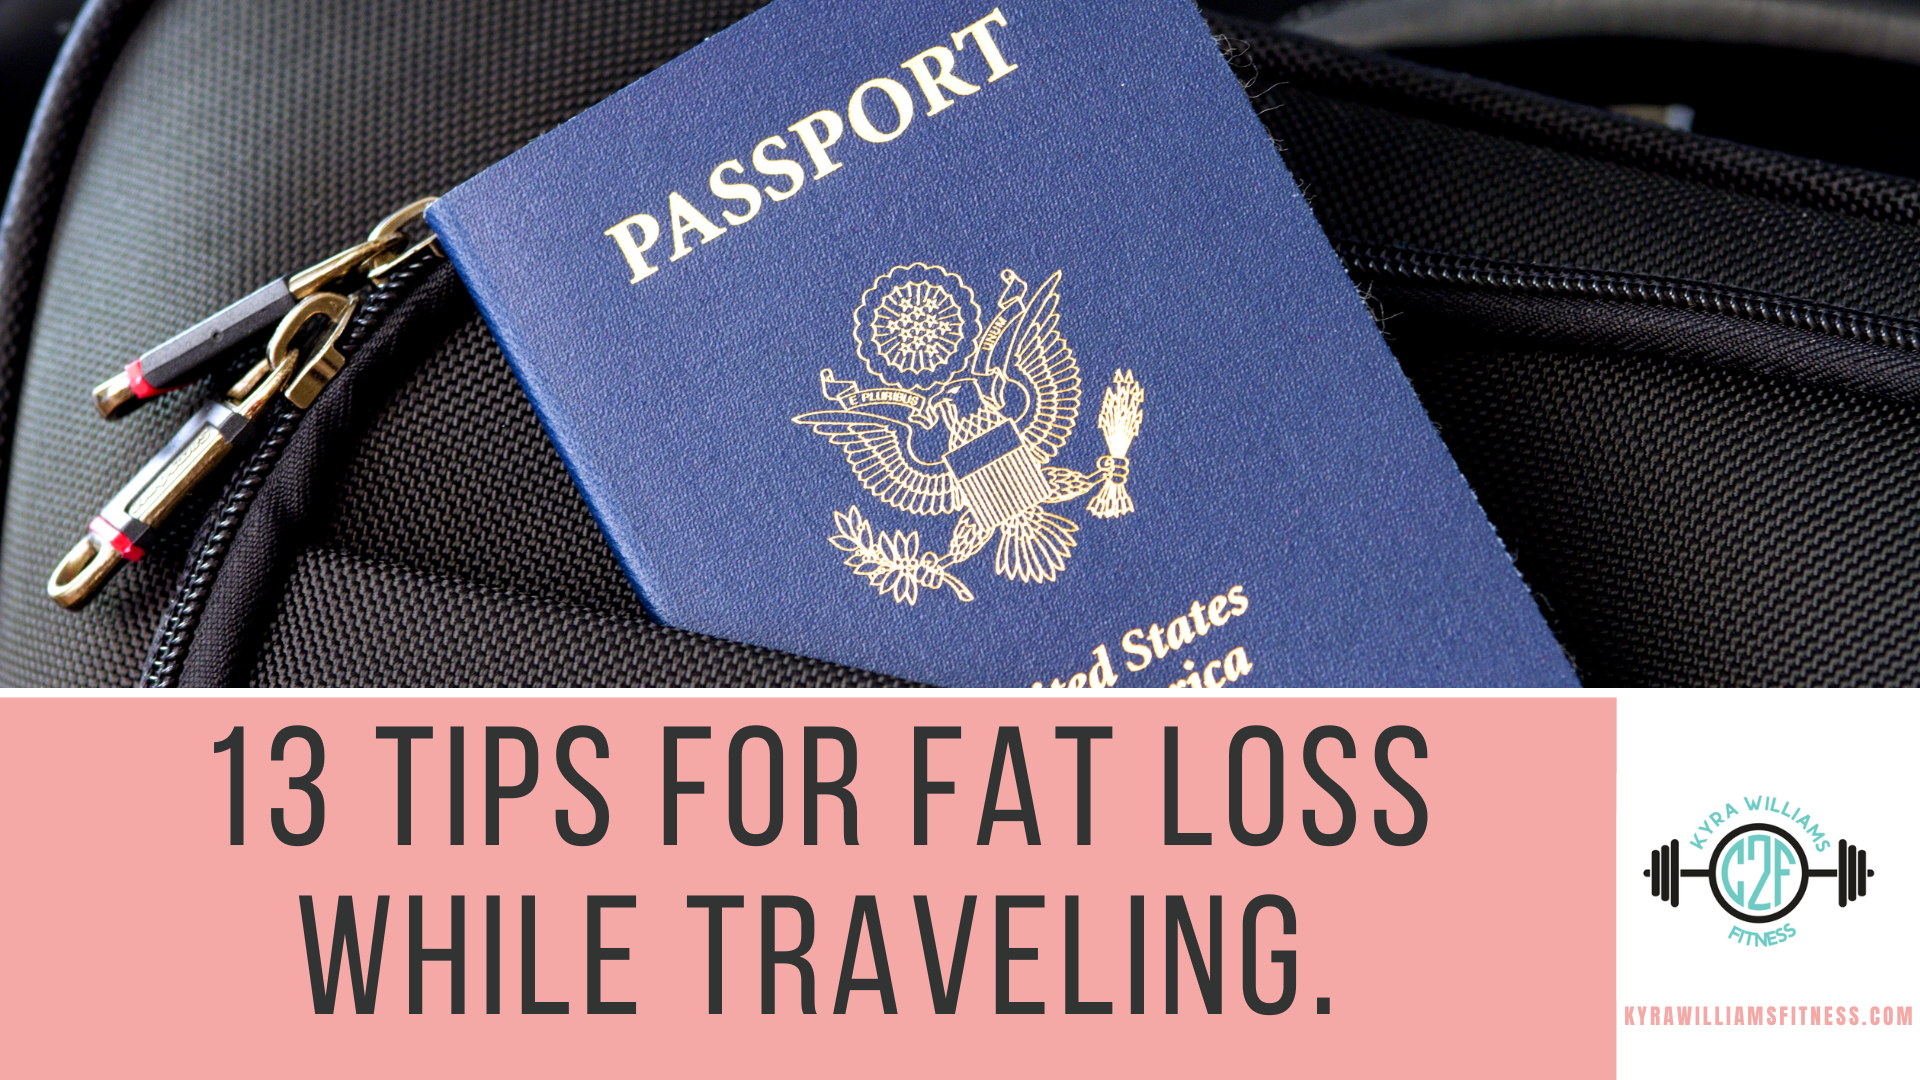 13 Tips for Fat Loss While Traveling